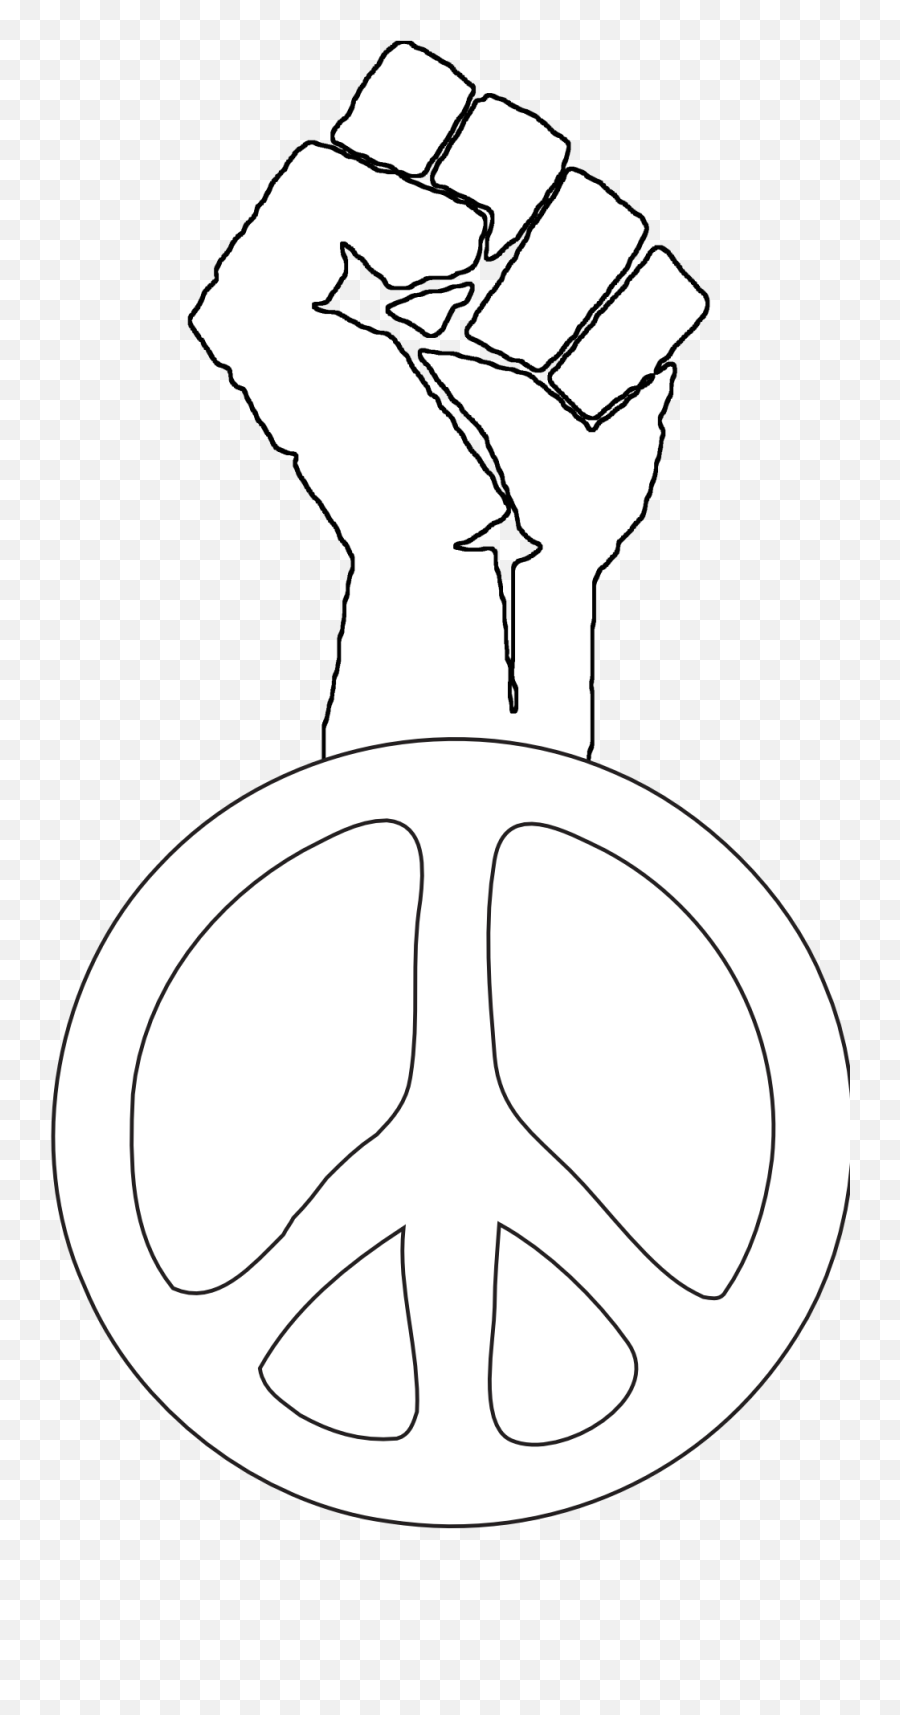 Download Drawn Fist Black Power - Black Power Coloring Pages Png,Black Fist Png